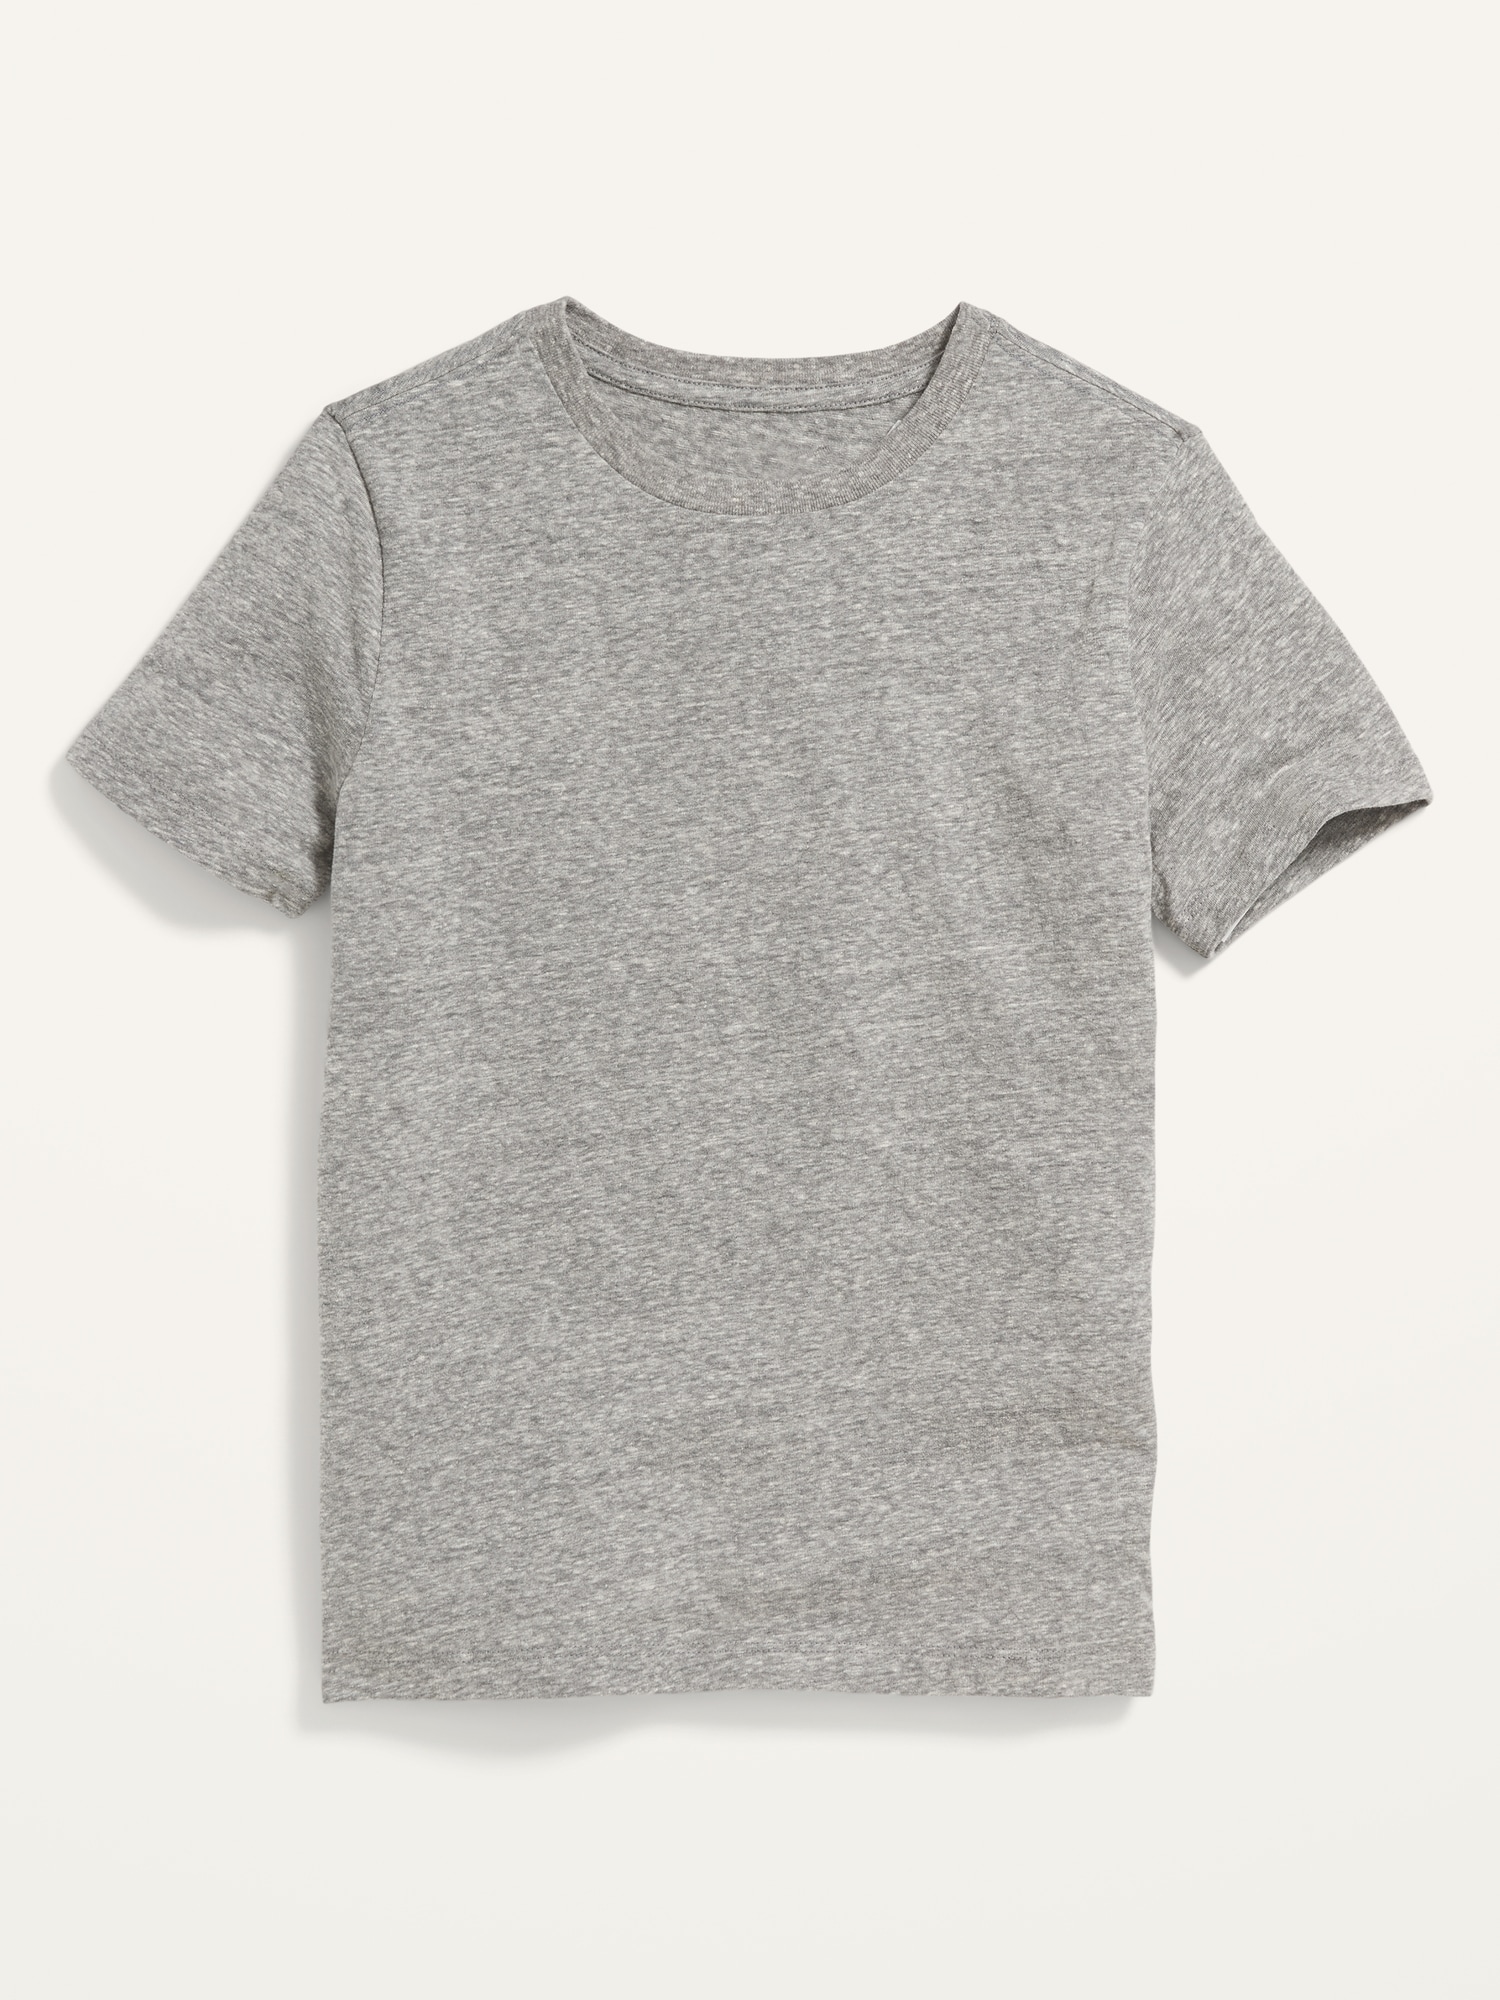 Old Navy Softest Crew-Neck T-Shirt for Boys gray. 1